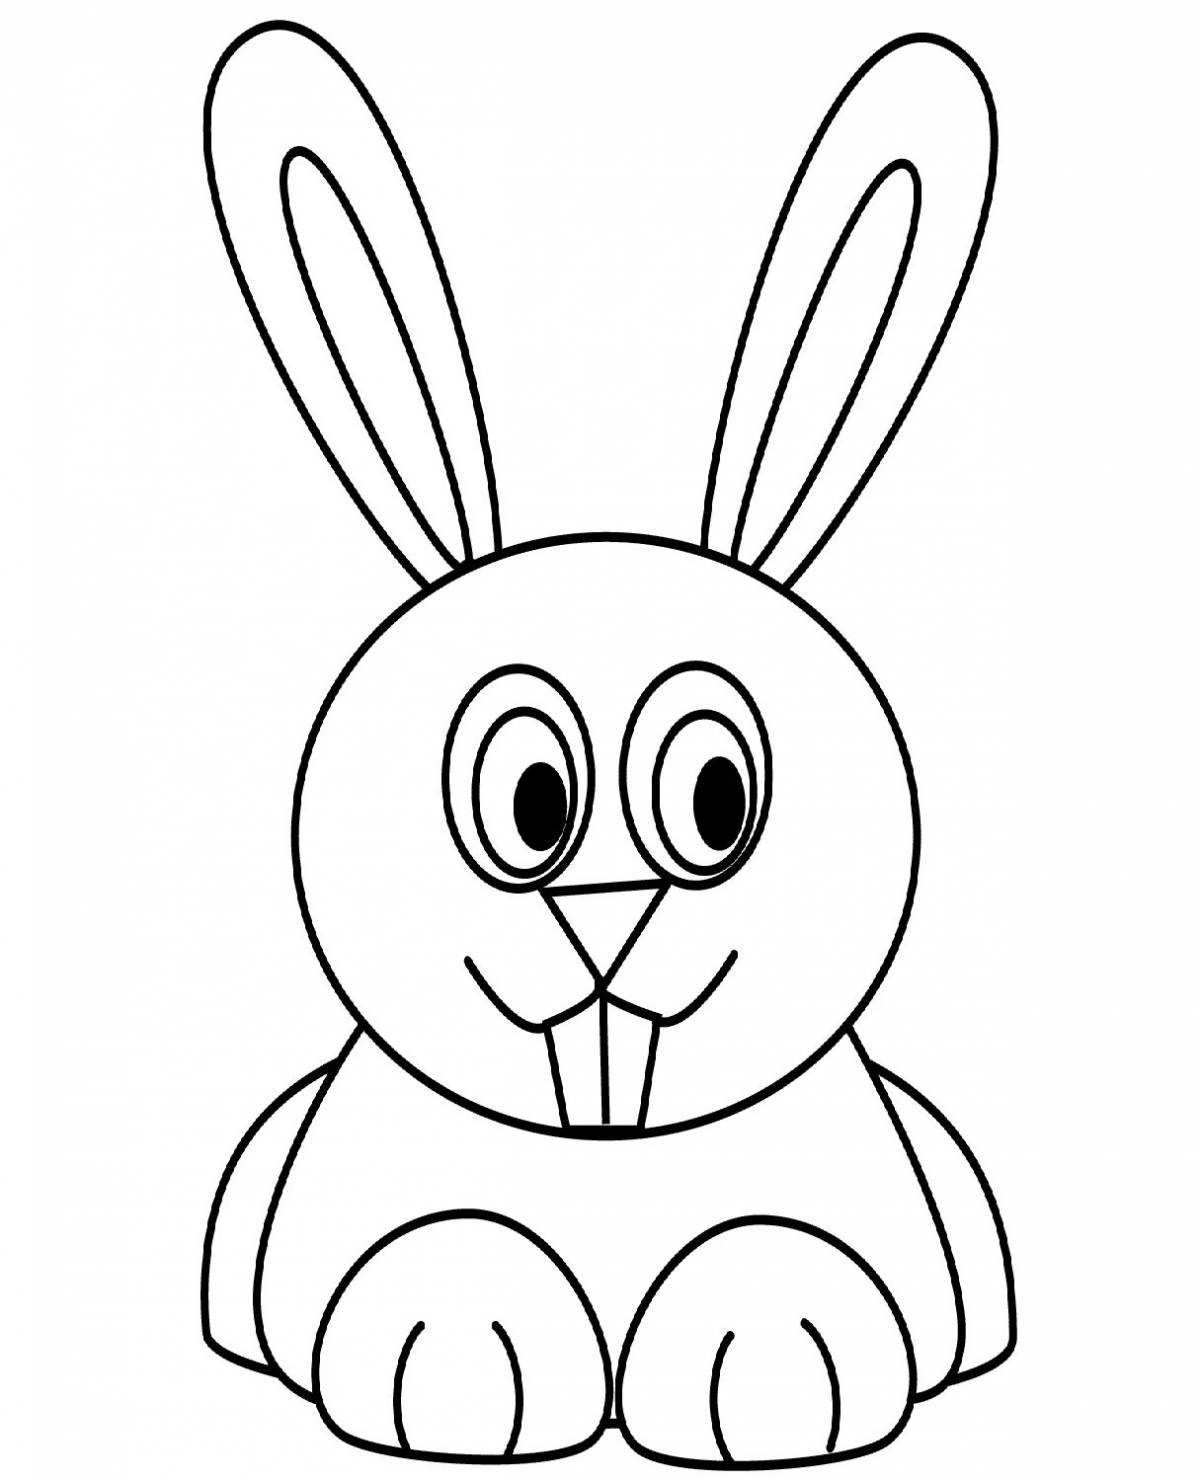 Fabulous rabbit coloring book for 2 year olds